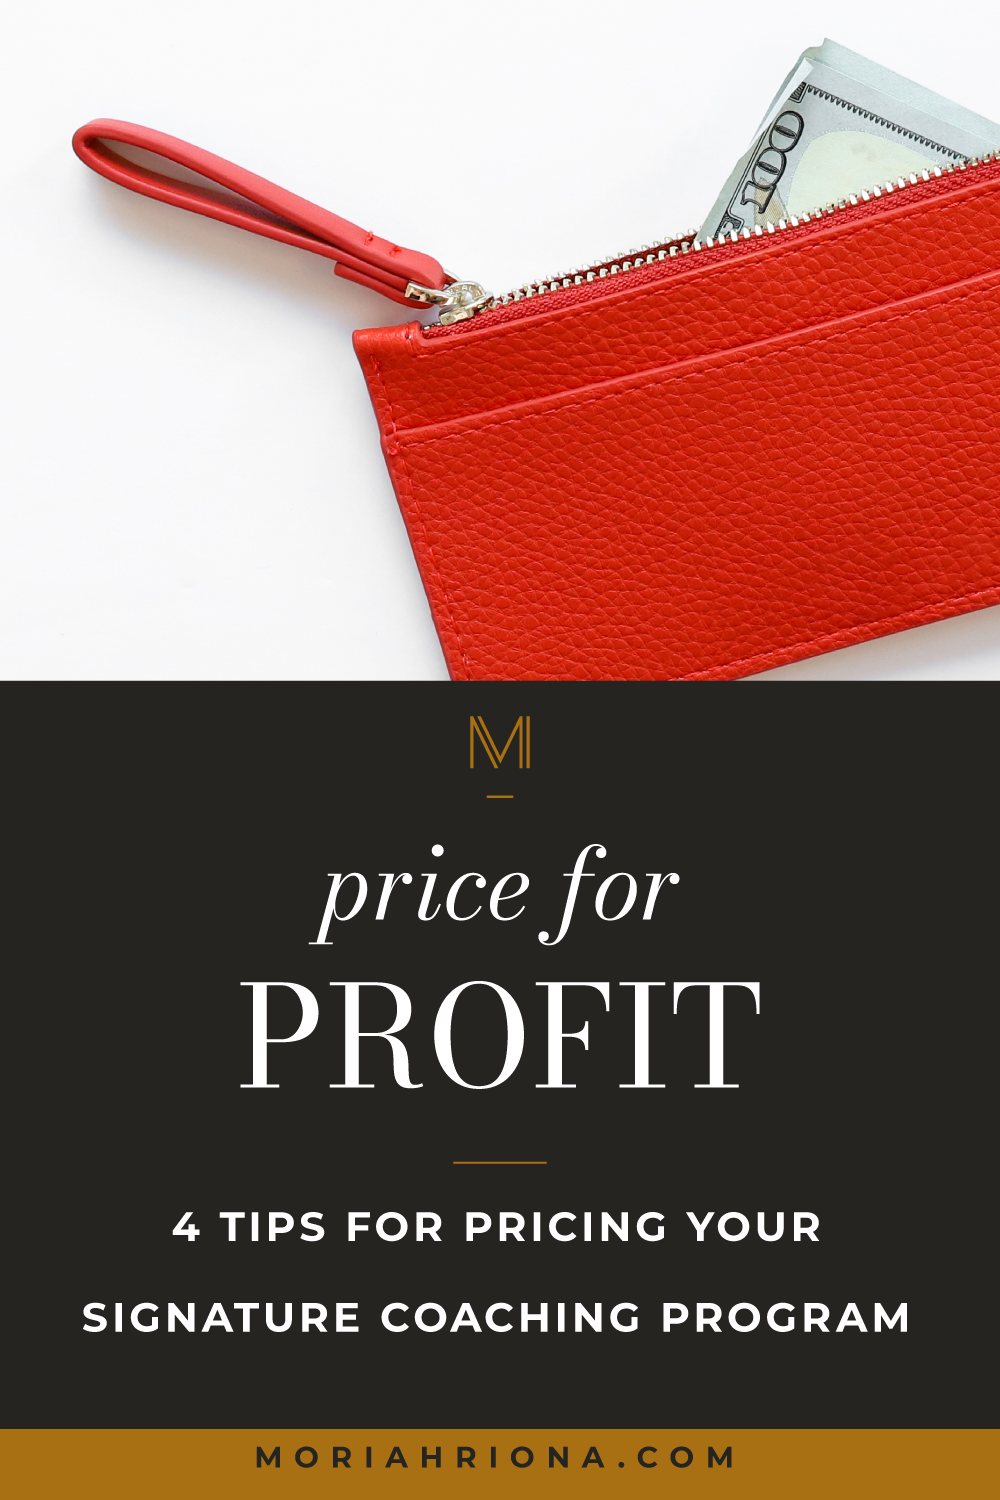 Wondering how to price life coaching services to stop attracting bargain hunters? Then this blog post is for you! I’m sharing the most effective pricing strategy for life coaches so you can learn how to price life coaching packages for high-ticket clients. #luxurybrand #lifecoach #lifecoaching #marketingtips